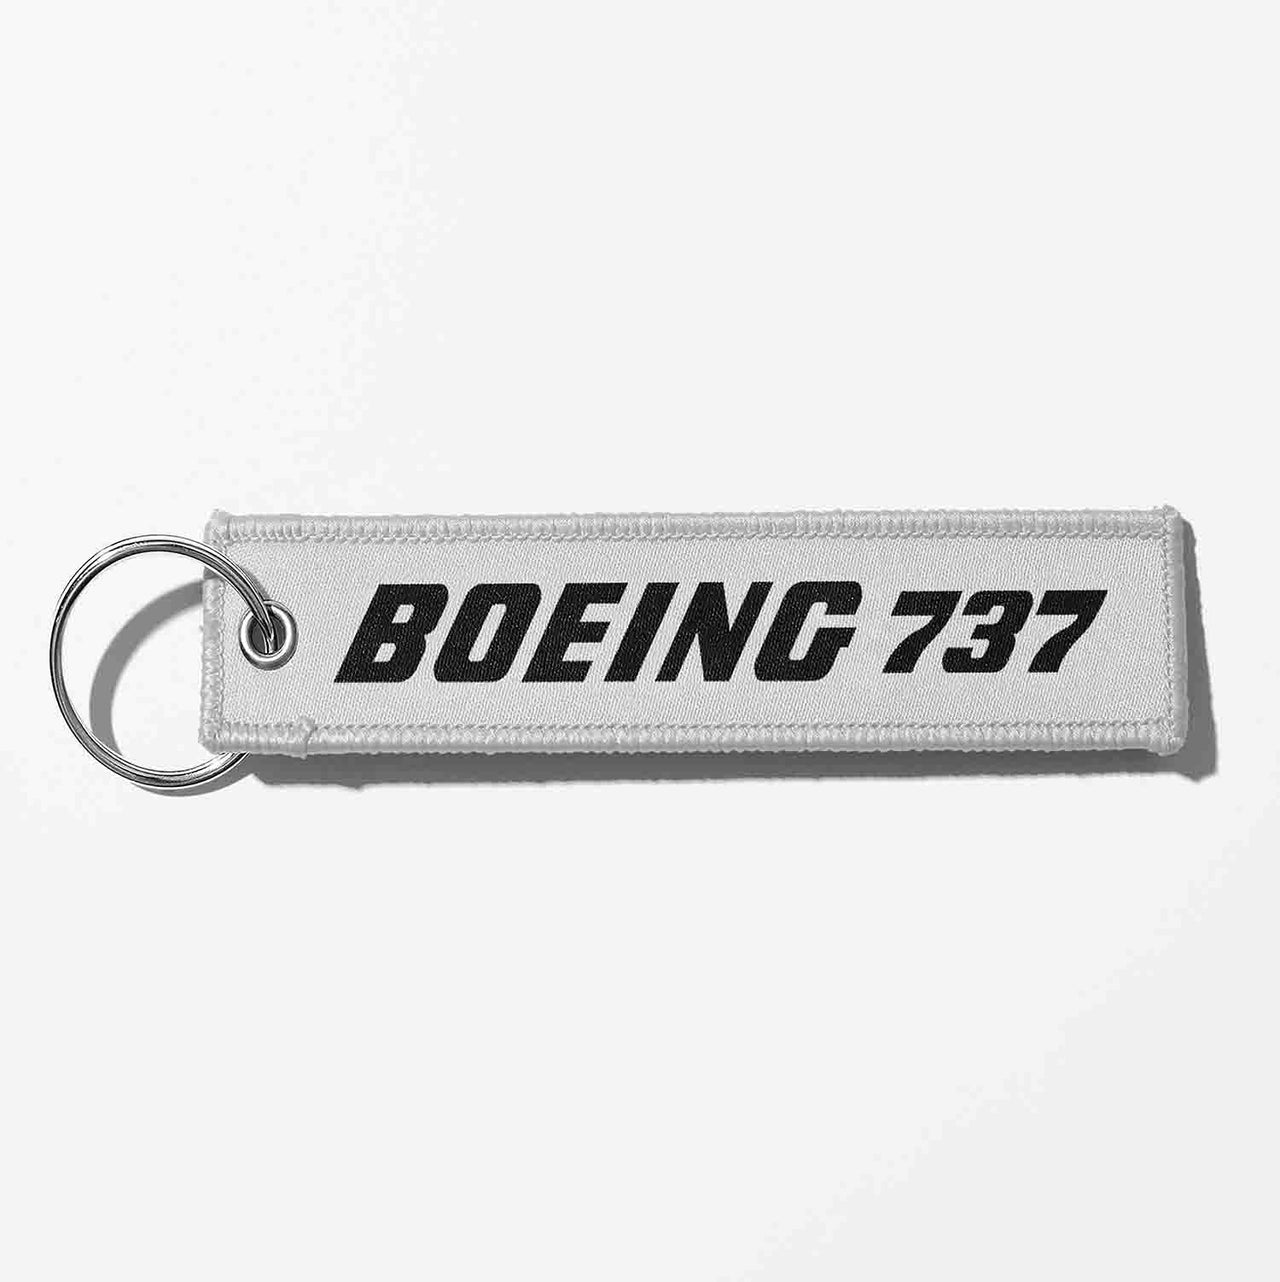 Boeing 737 & Text Designed Key Chains